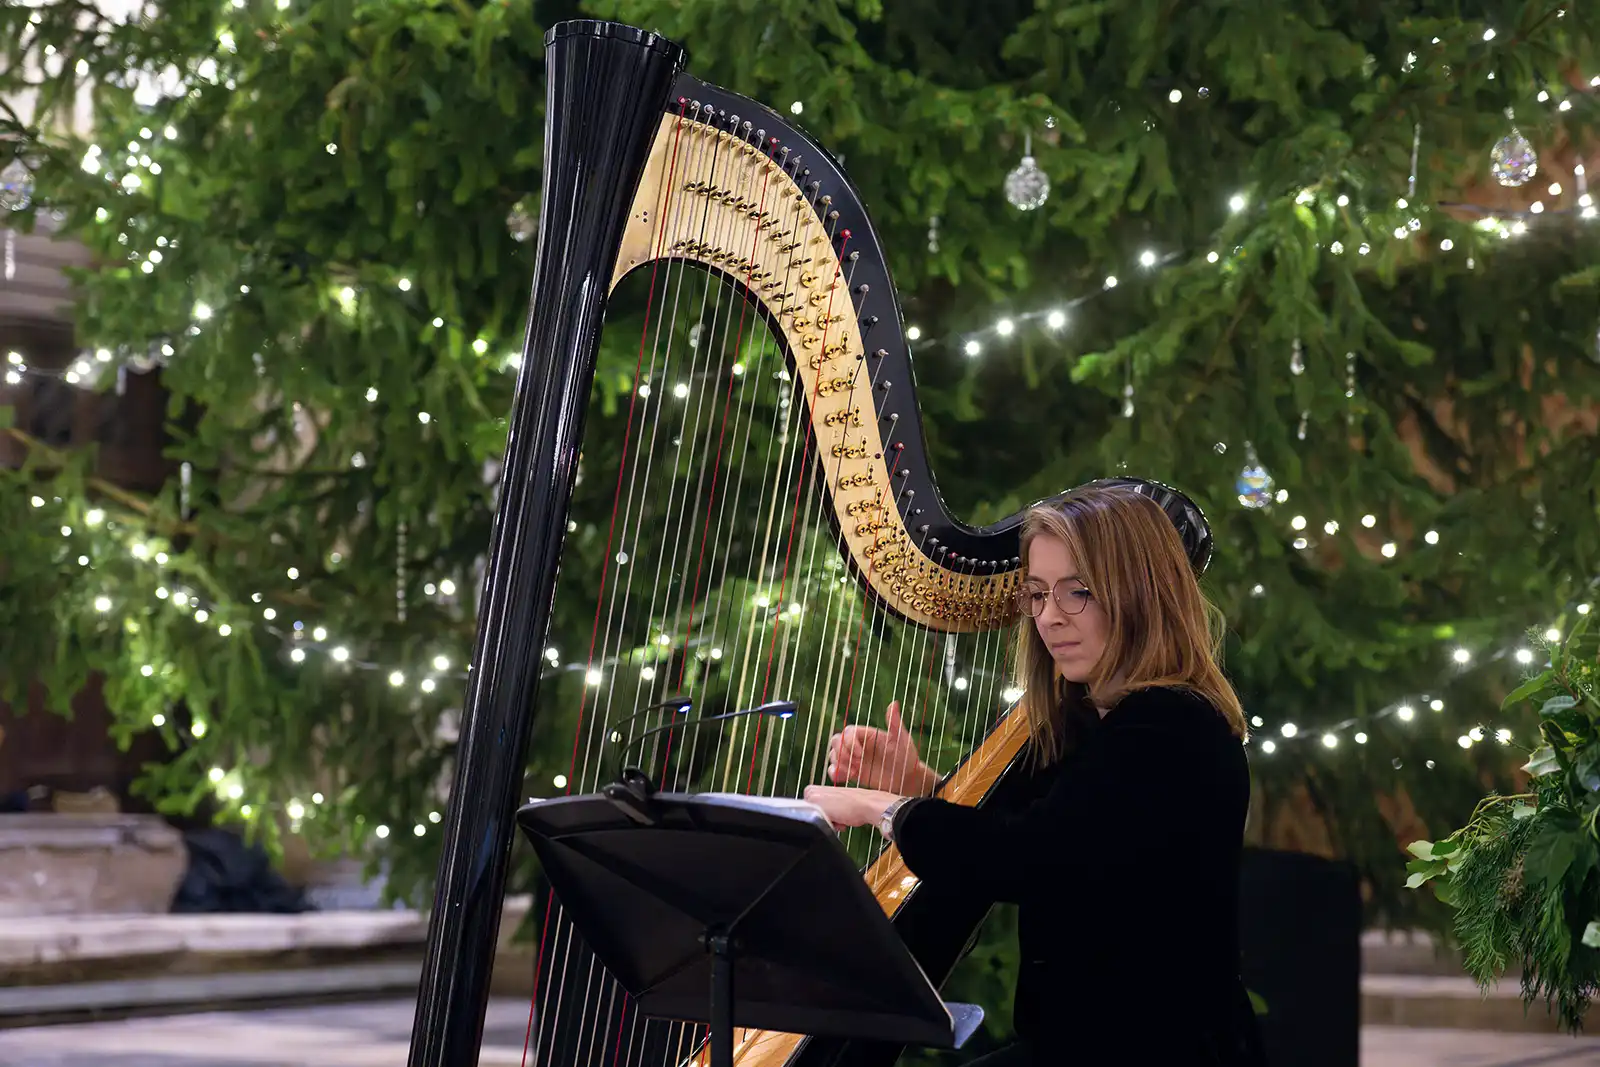 Music for the launch was provided by Wiltshire harpist, Katie Salomon. Picture: Finnbarr Webster